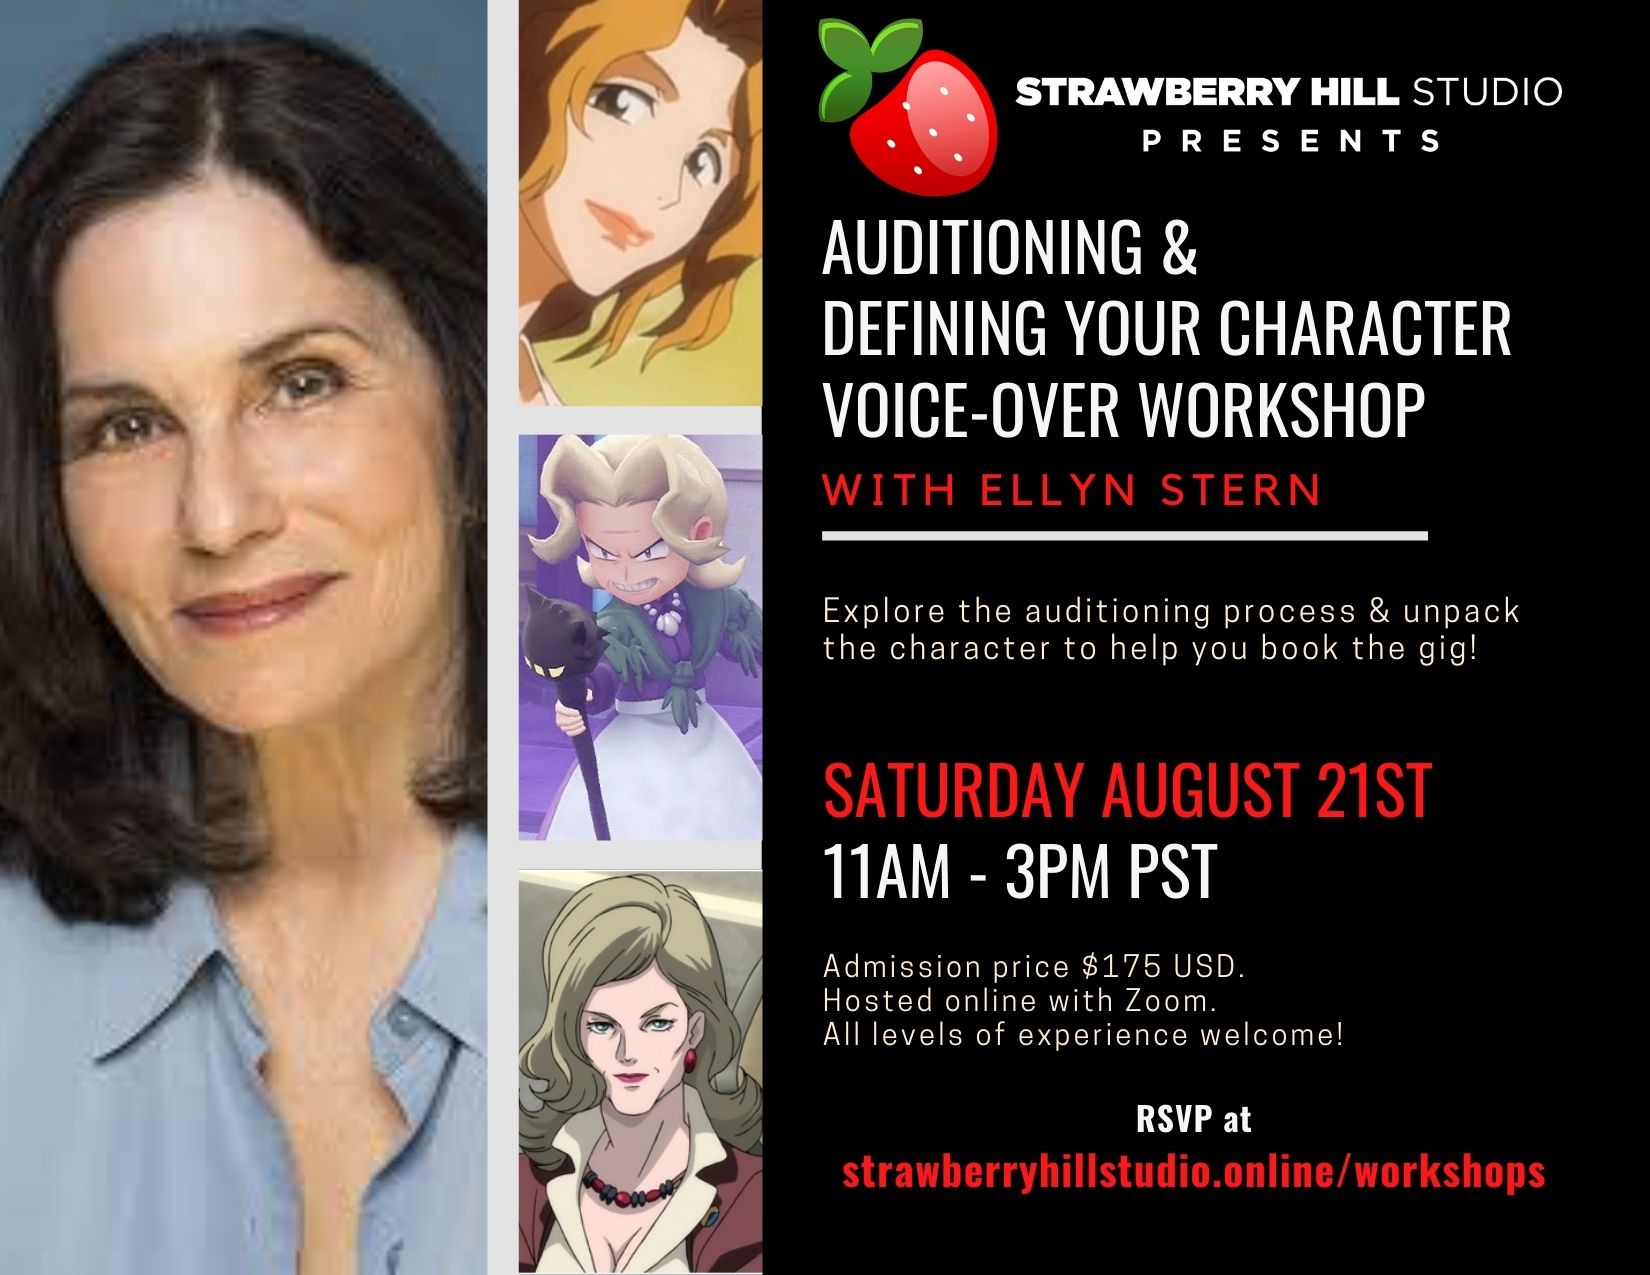 Auditioning & Defining Your Character Voice-Over Workshop w/ Ellyn Stern